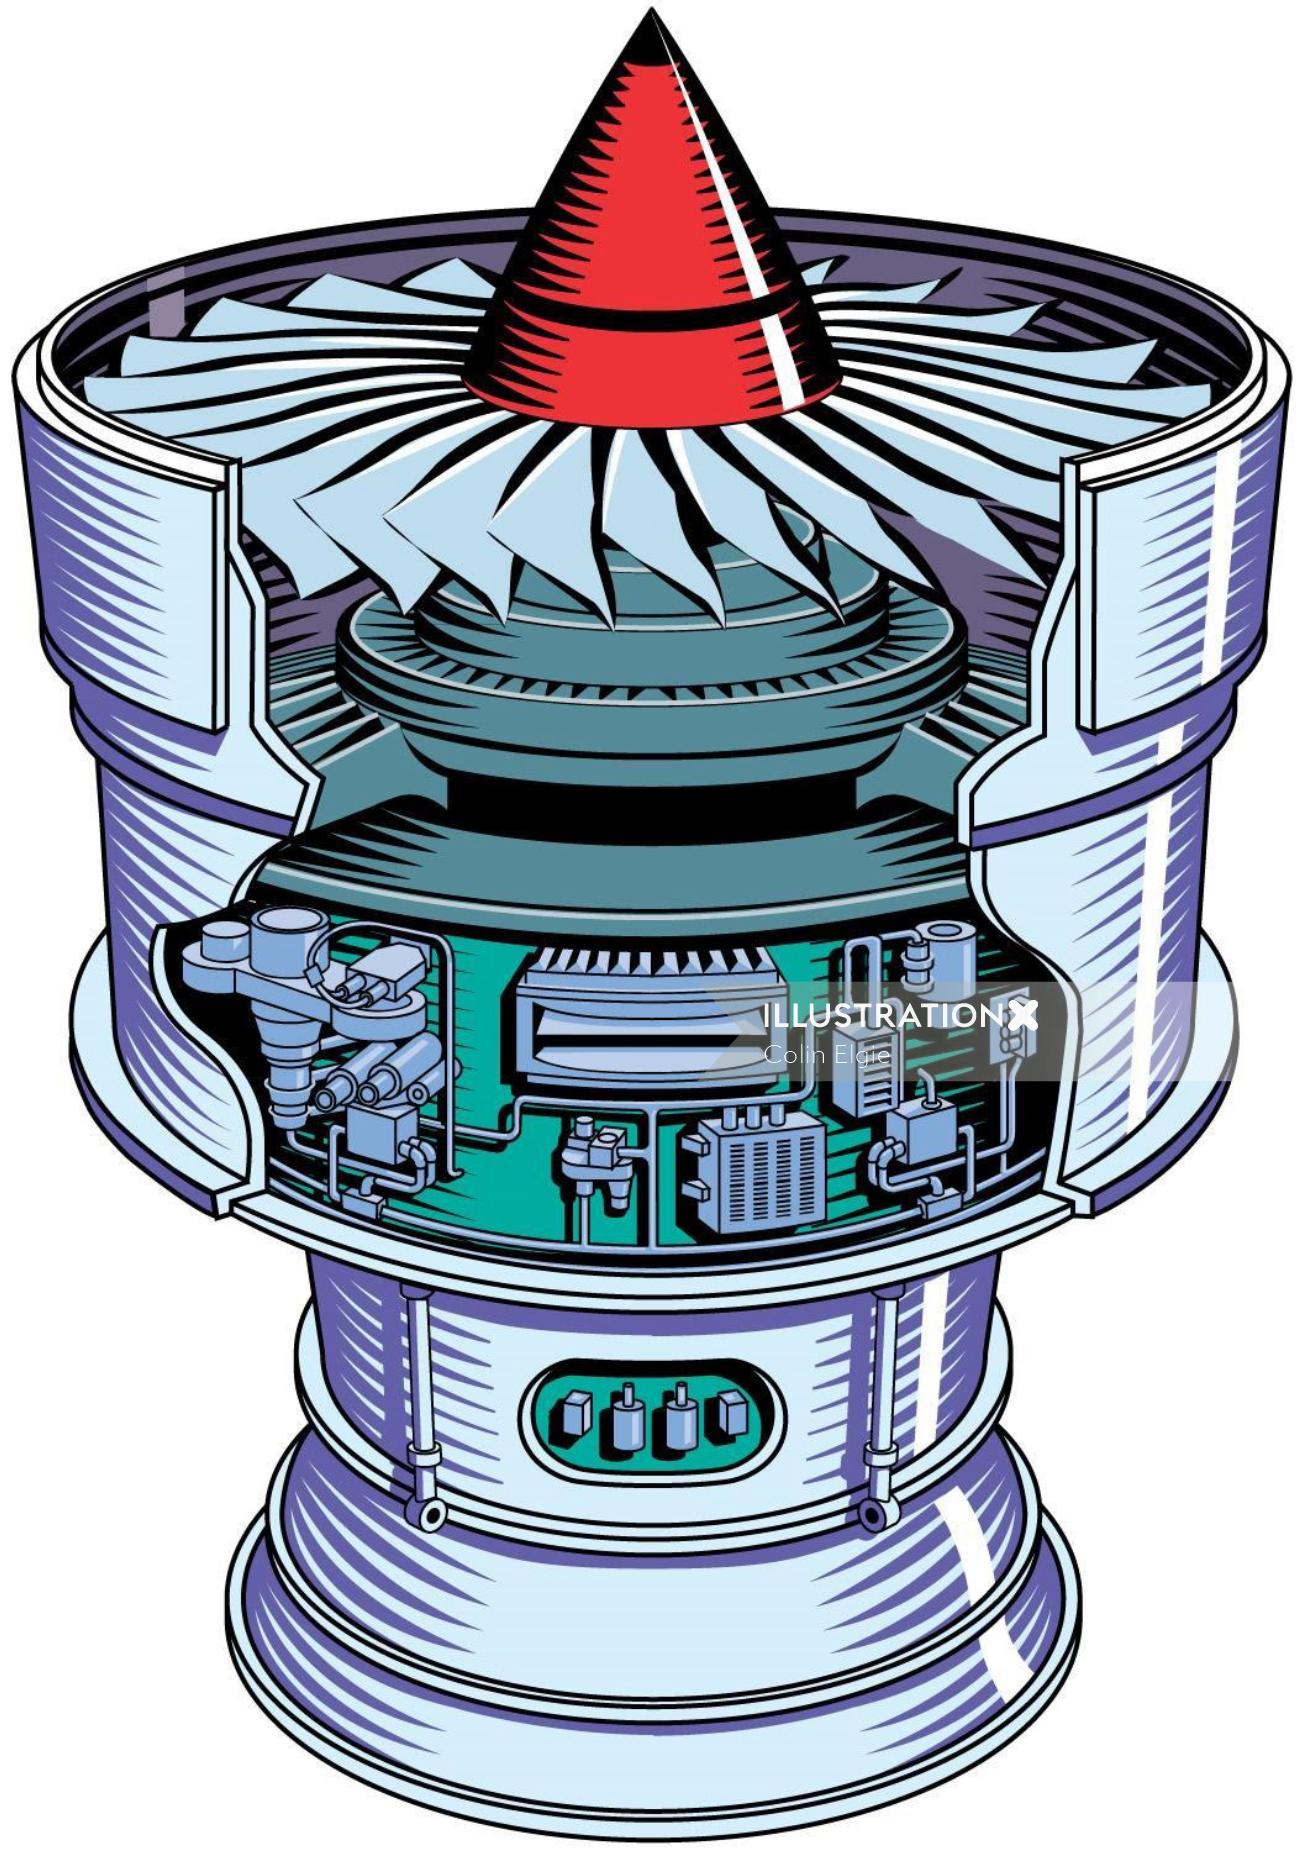 An illustration of a jet engine for Lucas Aerospace